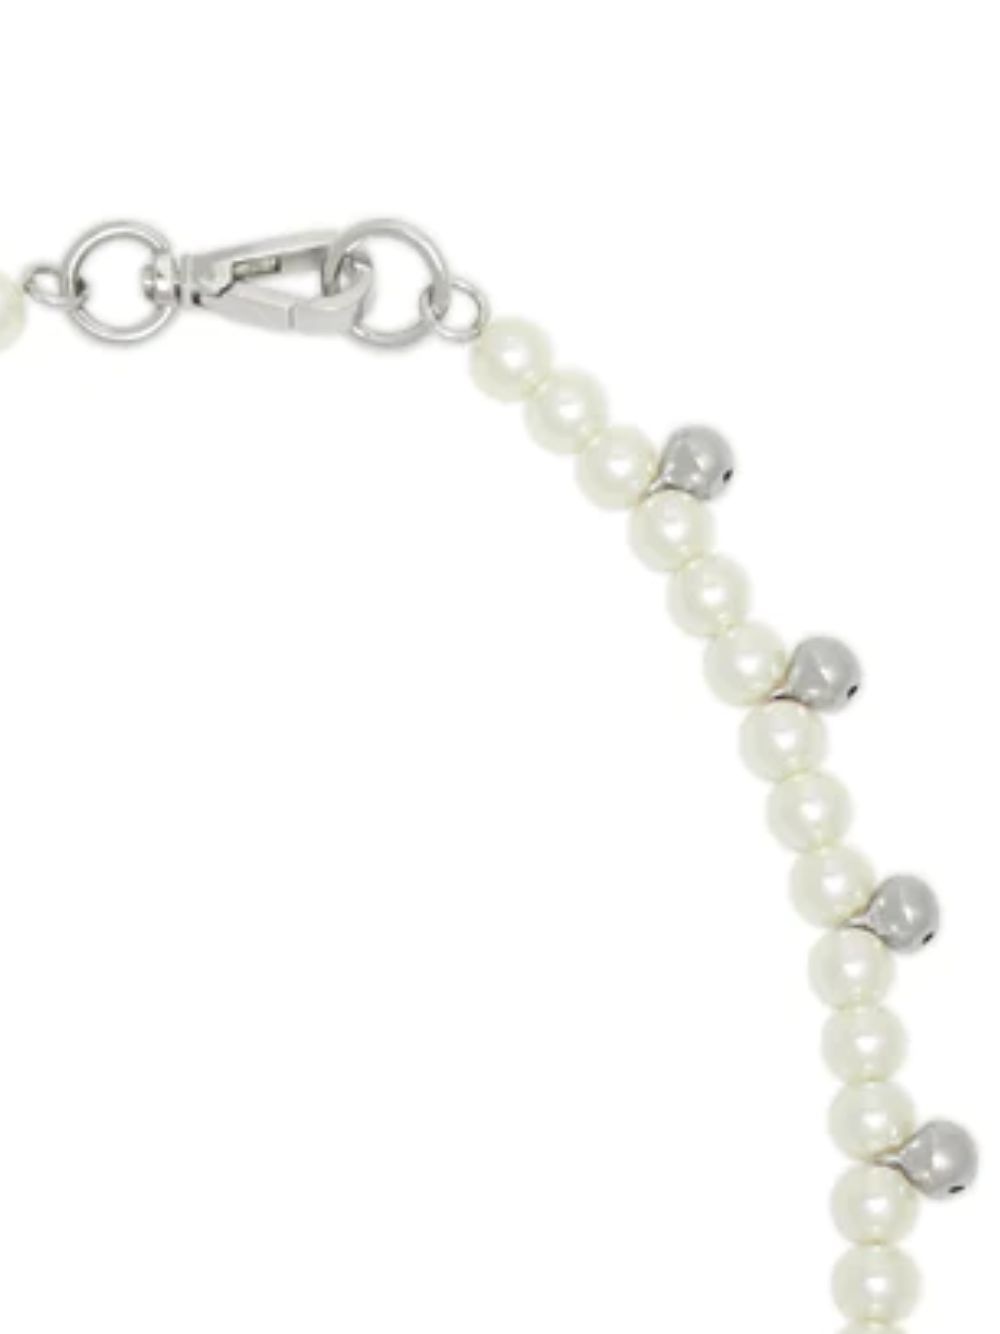 BELL CHARM AND PEARL NECKLACE - 2